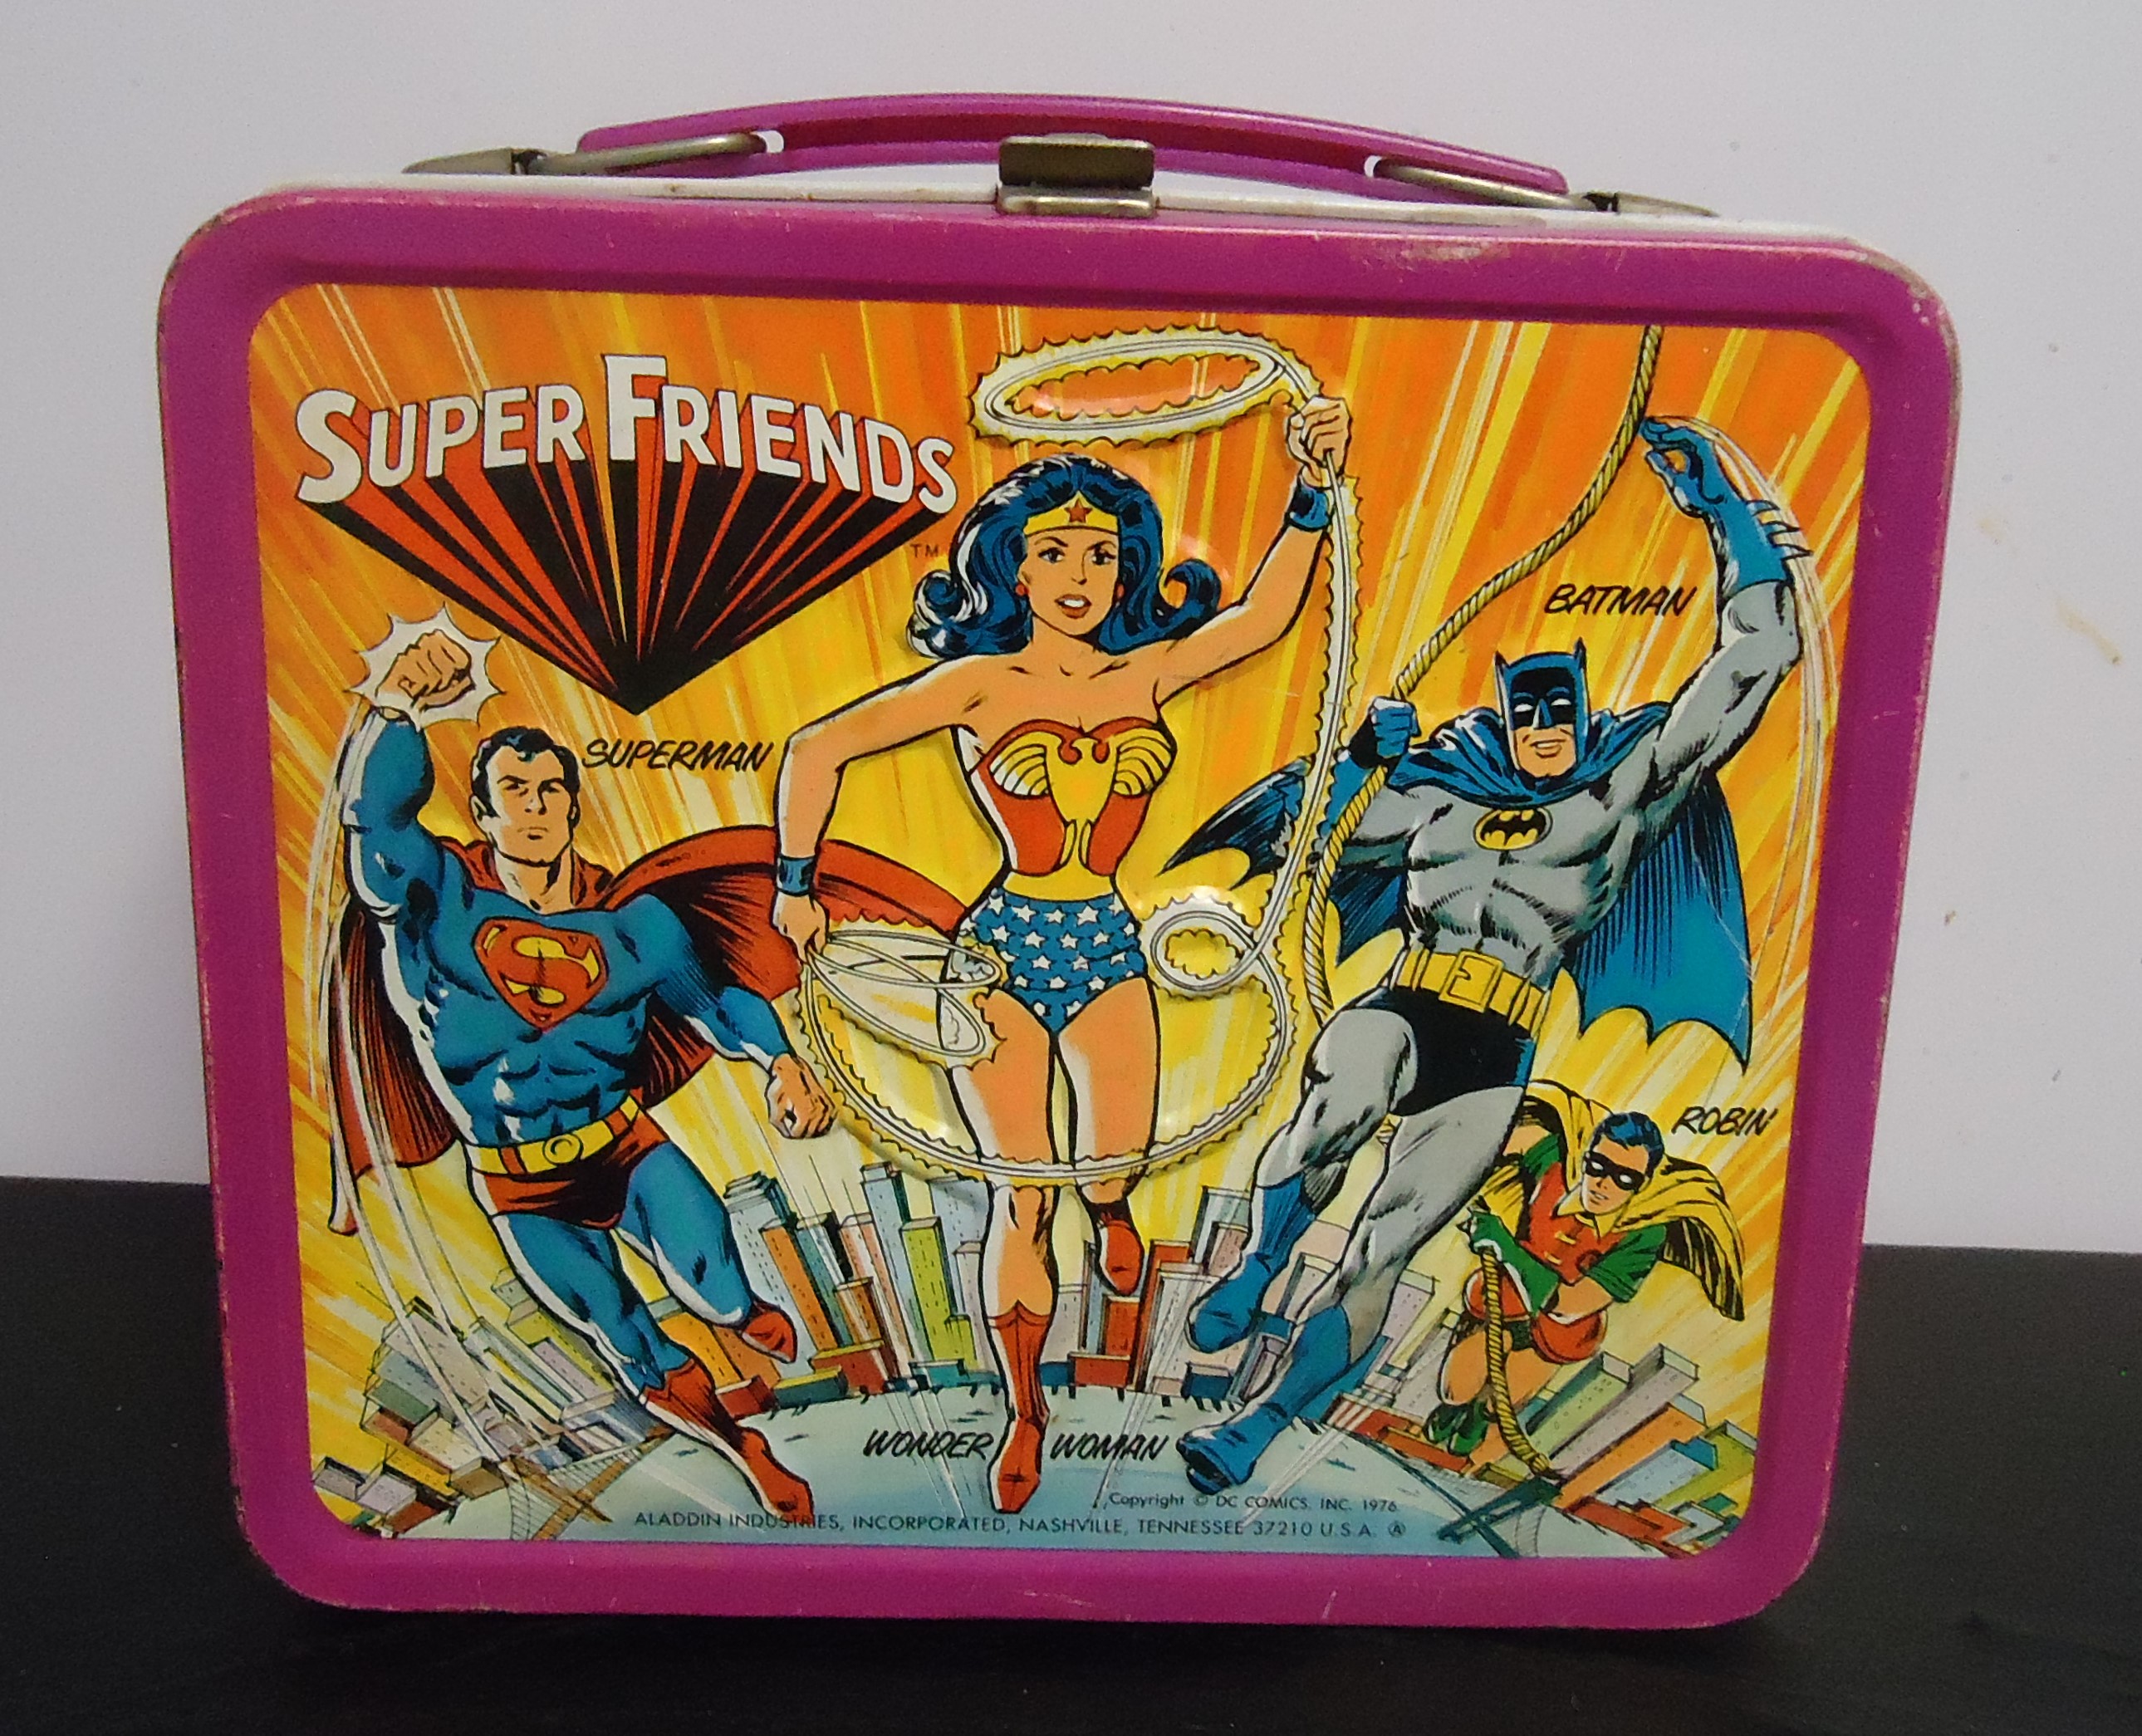 (2H) "Super Friends" Metal Lunch Box
W/ Out Thermos
$38.00
